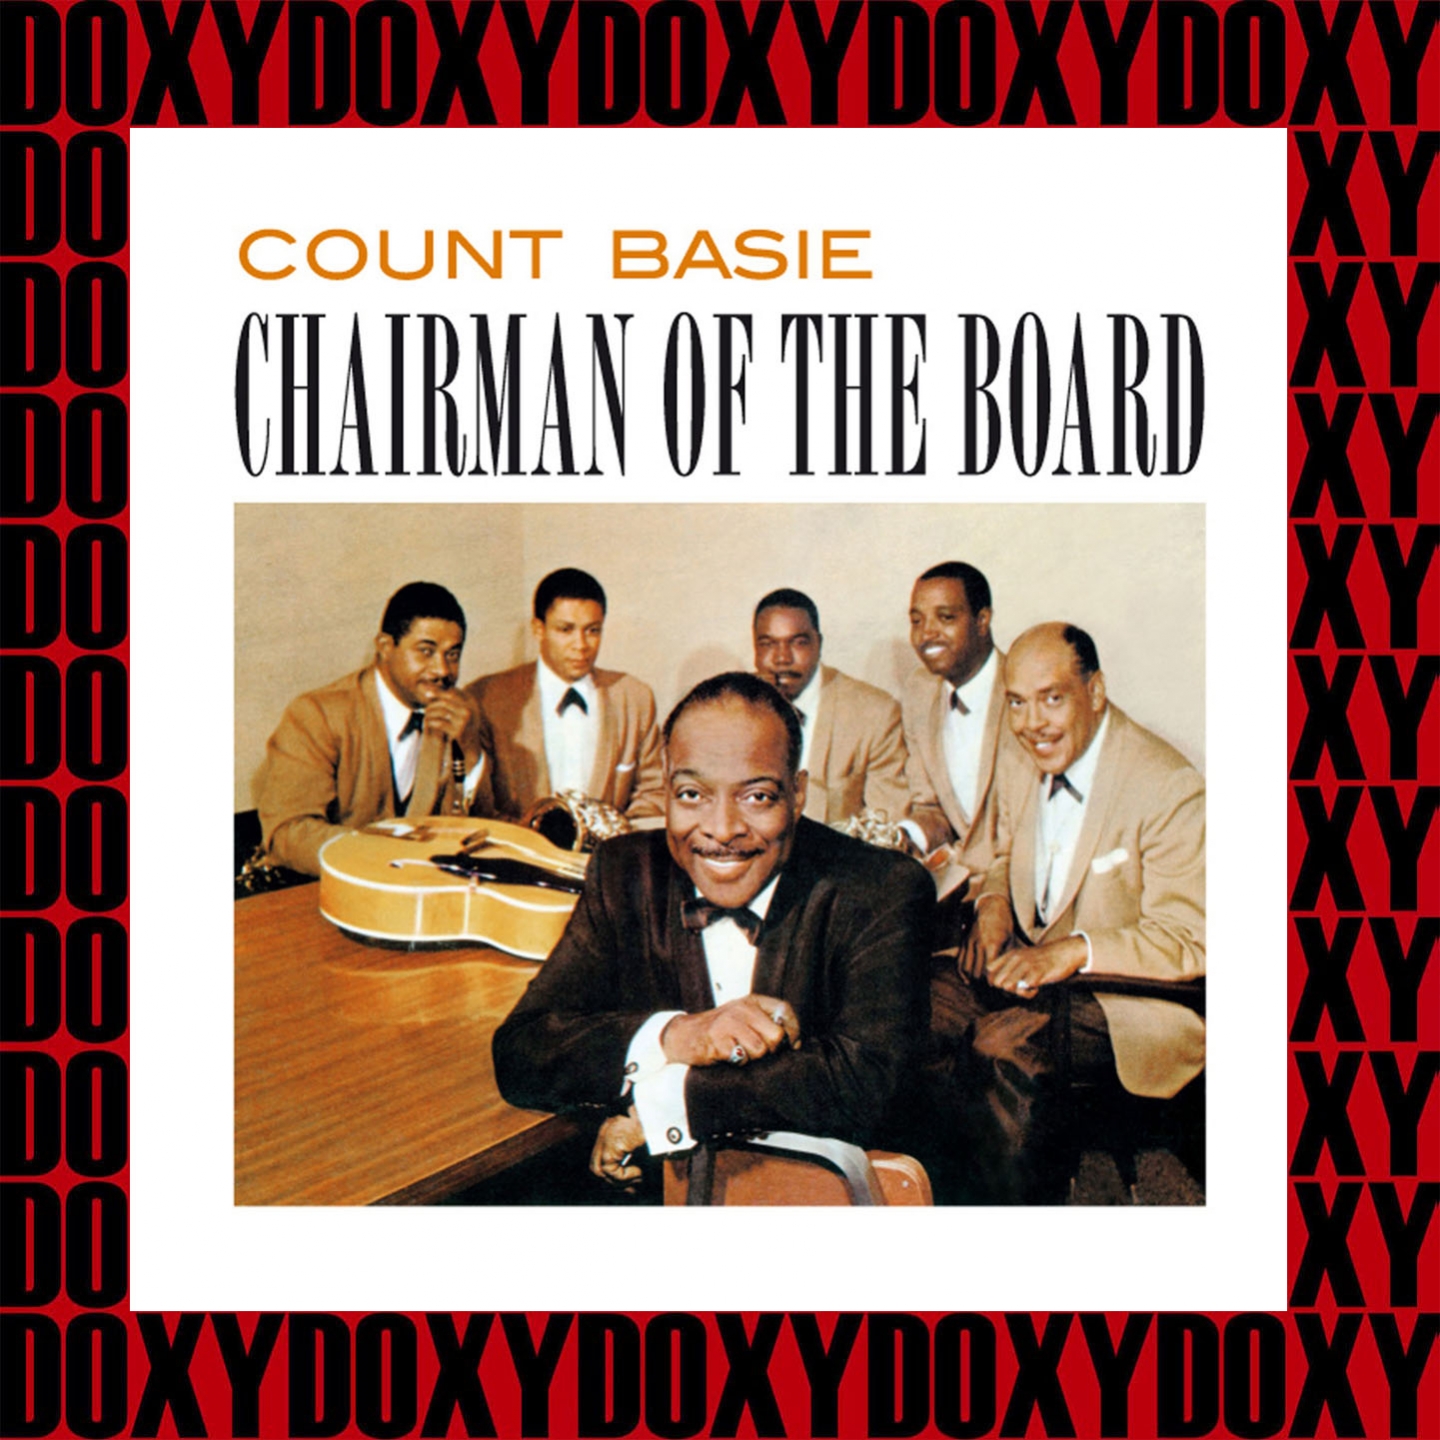 Chairman of the Board (Expanded,Remastered Version) (Doxy Collection)